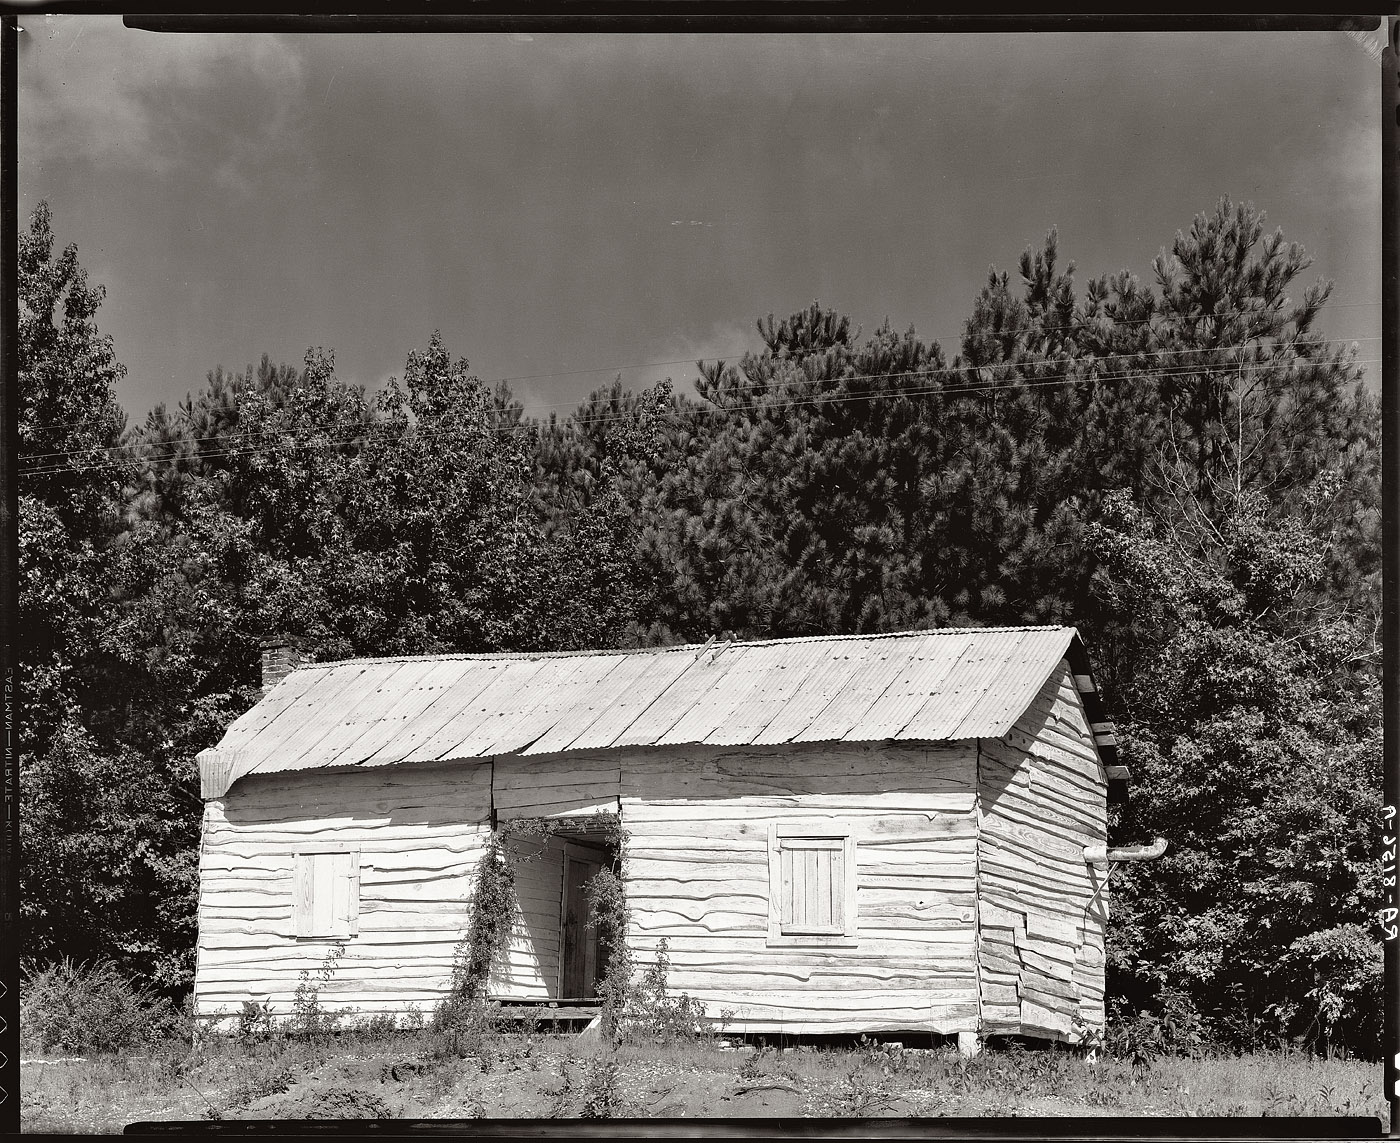 1935 or 1936. "Negro cabin in Hale County, Alabama." View full size. 8x10 nitrate negative by Walker Evans for the Farm Security Administration.